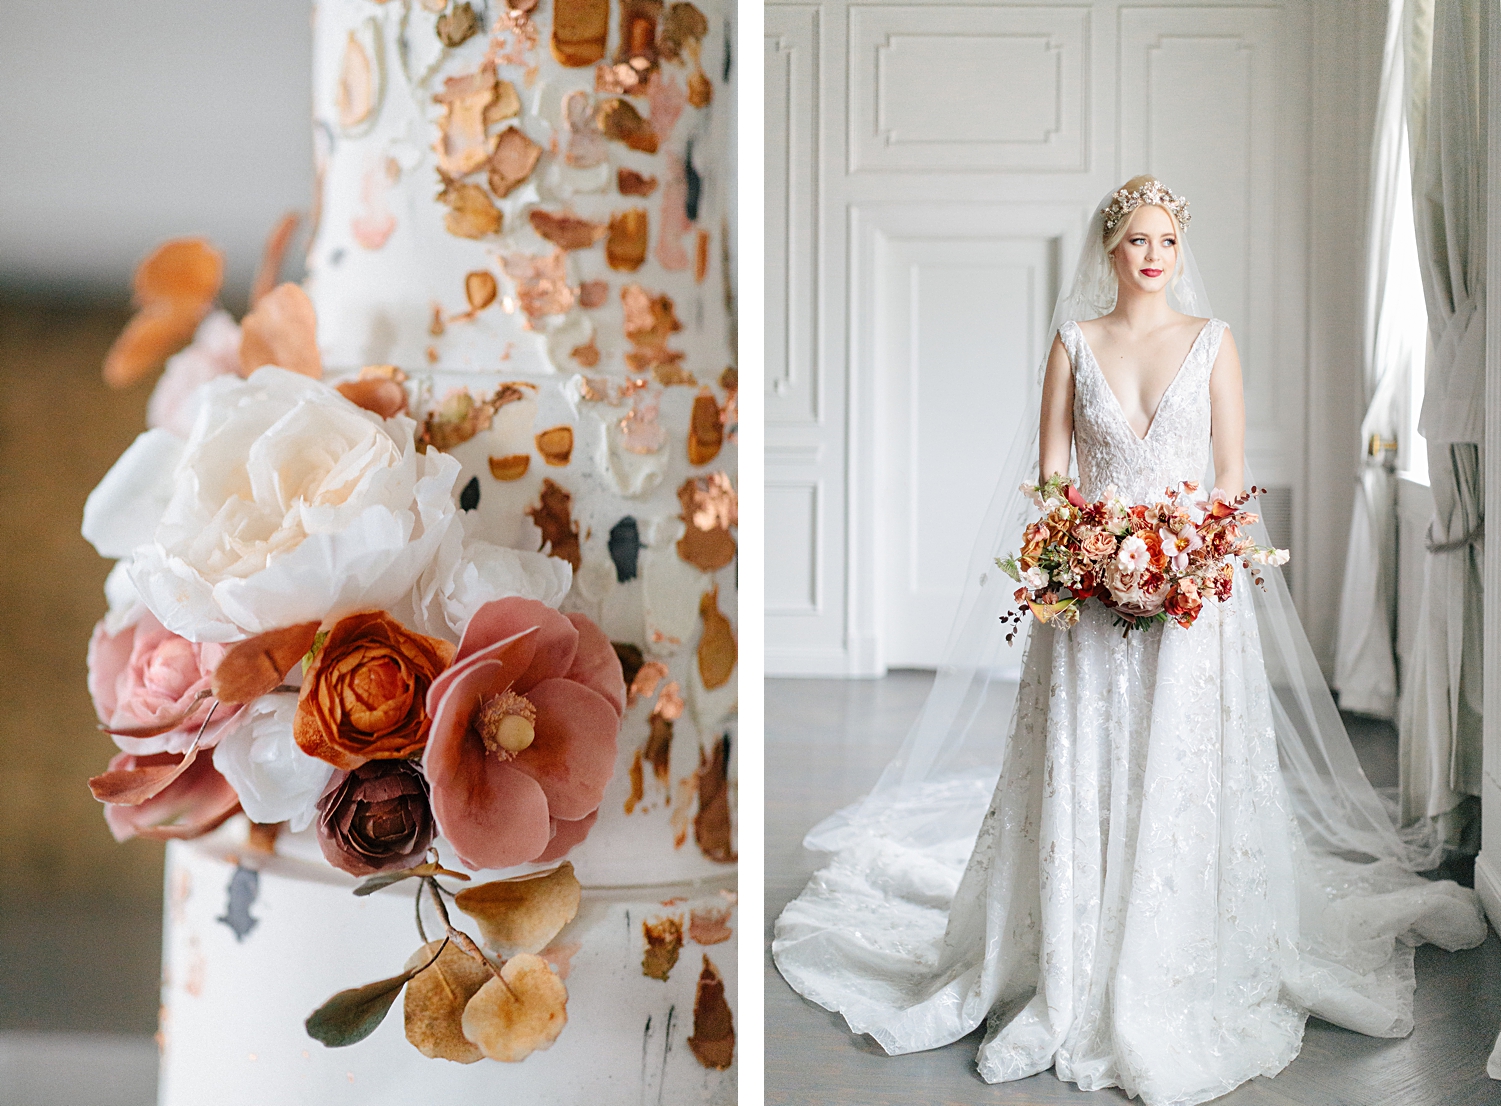 bride in shimmering white wedding dress and veil standing in white room holding orange bridal bouquet